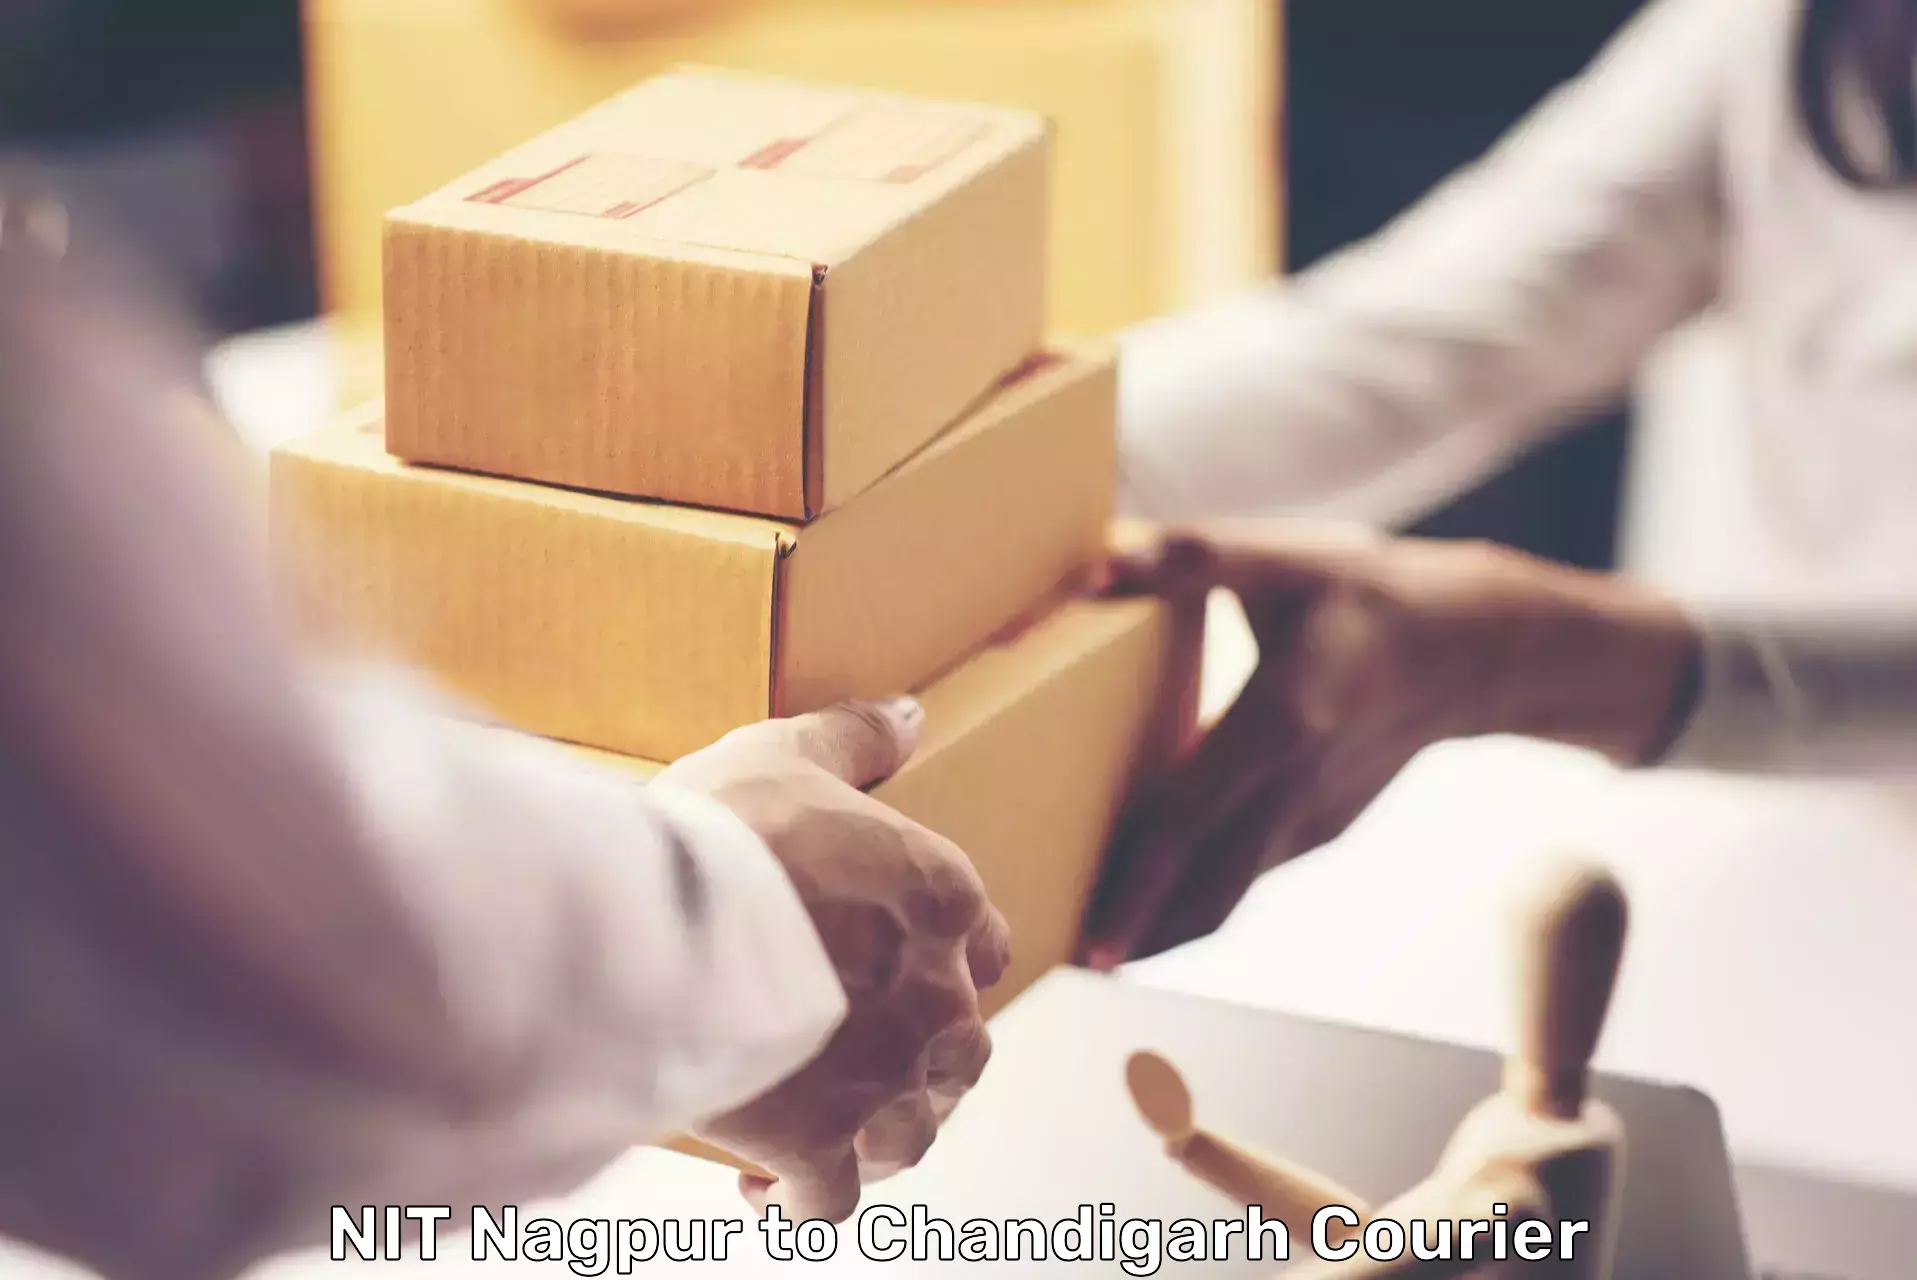 Bulk courier orders NIT Nagpur to Chandigarh